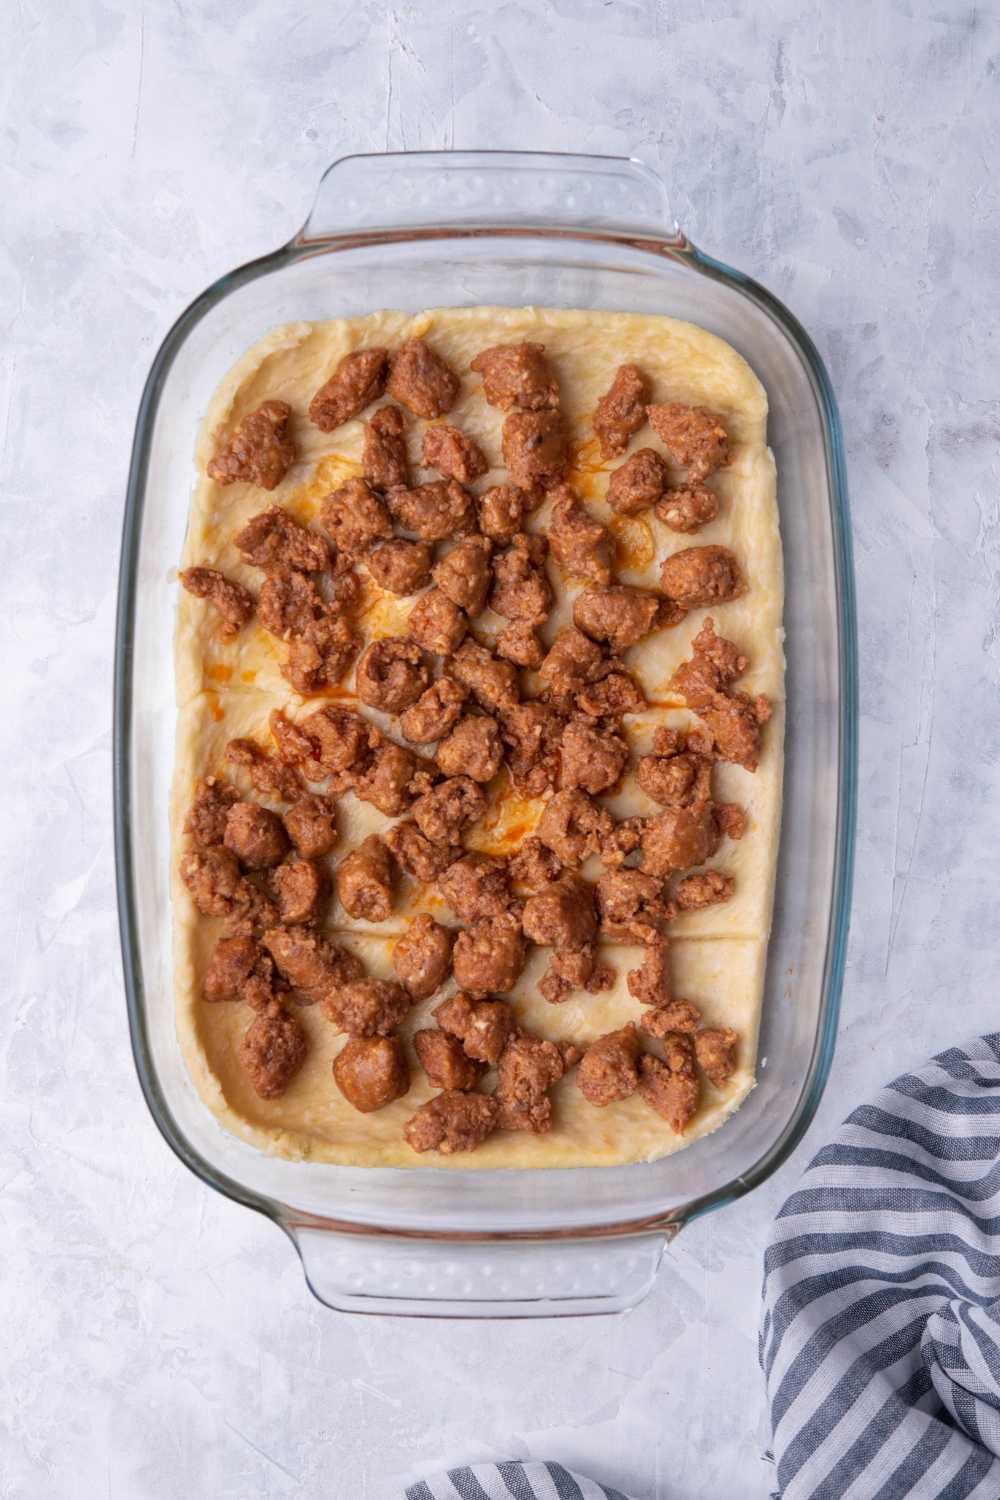 A casserole dish filled with crescent roll dough and pieces of uncooked sausage.